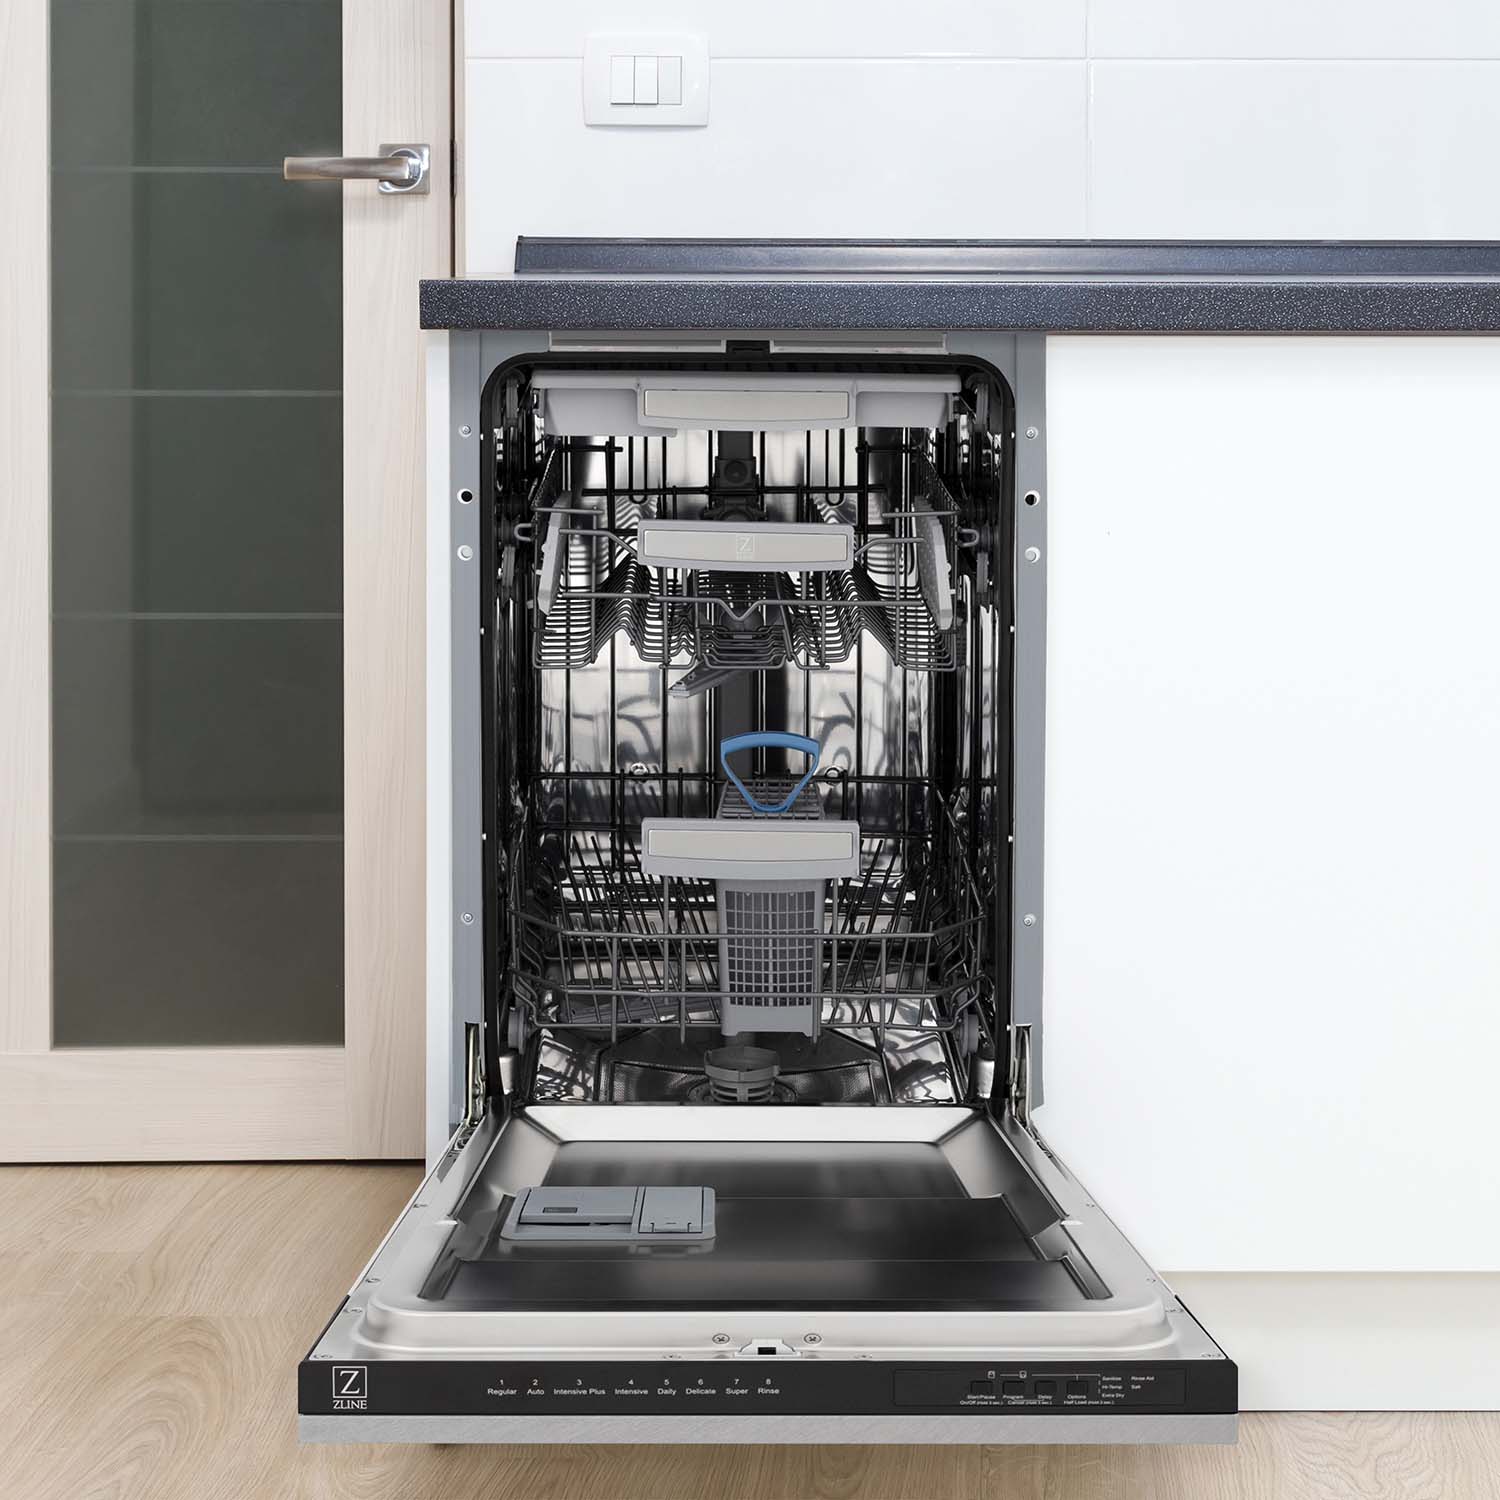 ZLINE 18 in. Tallac Series 3rd Rack Top Control Dishwasher in Fingerprint Resistant with Stainless Steel Tub, 51dBa (DWV-SN-18) built-in to cabinets in a luxury kitchen.